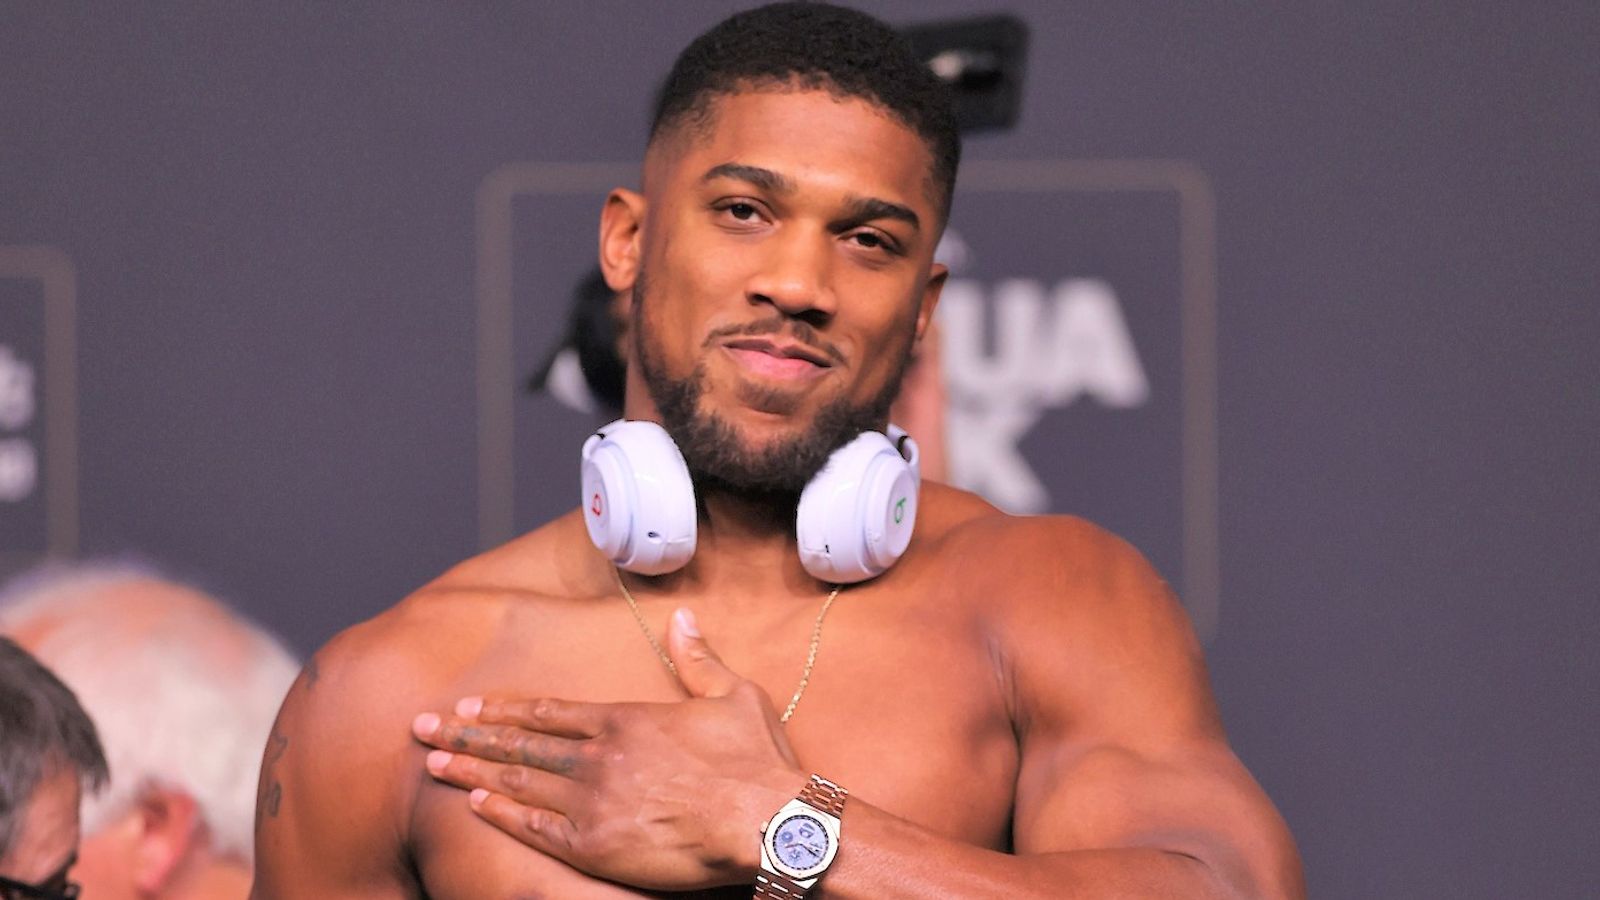 Anthony Joshua is showing ‘serious intentions’ ahead of Oleksandr Usyk rematch, says Johnny Nelson